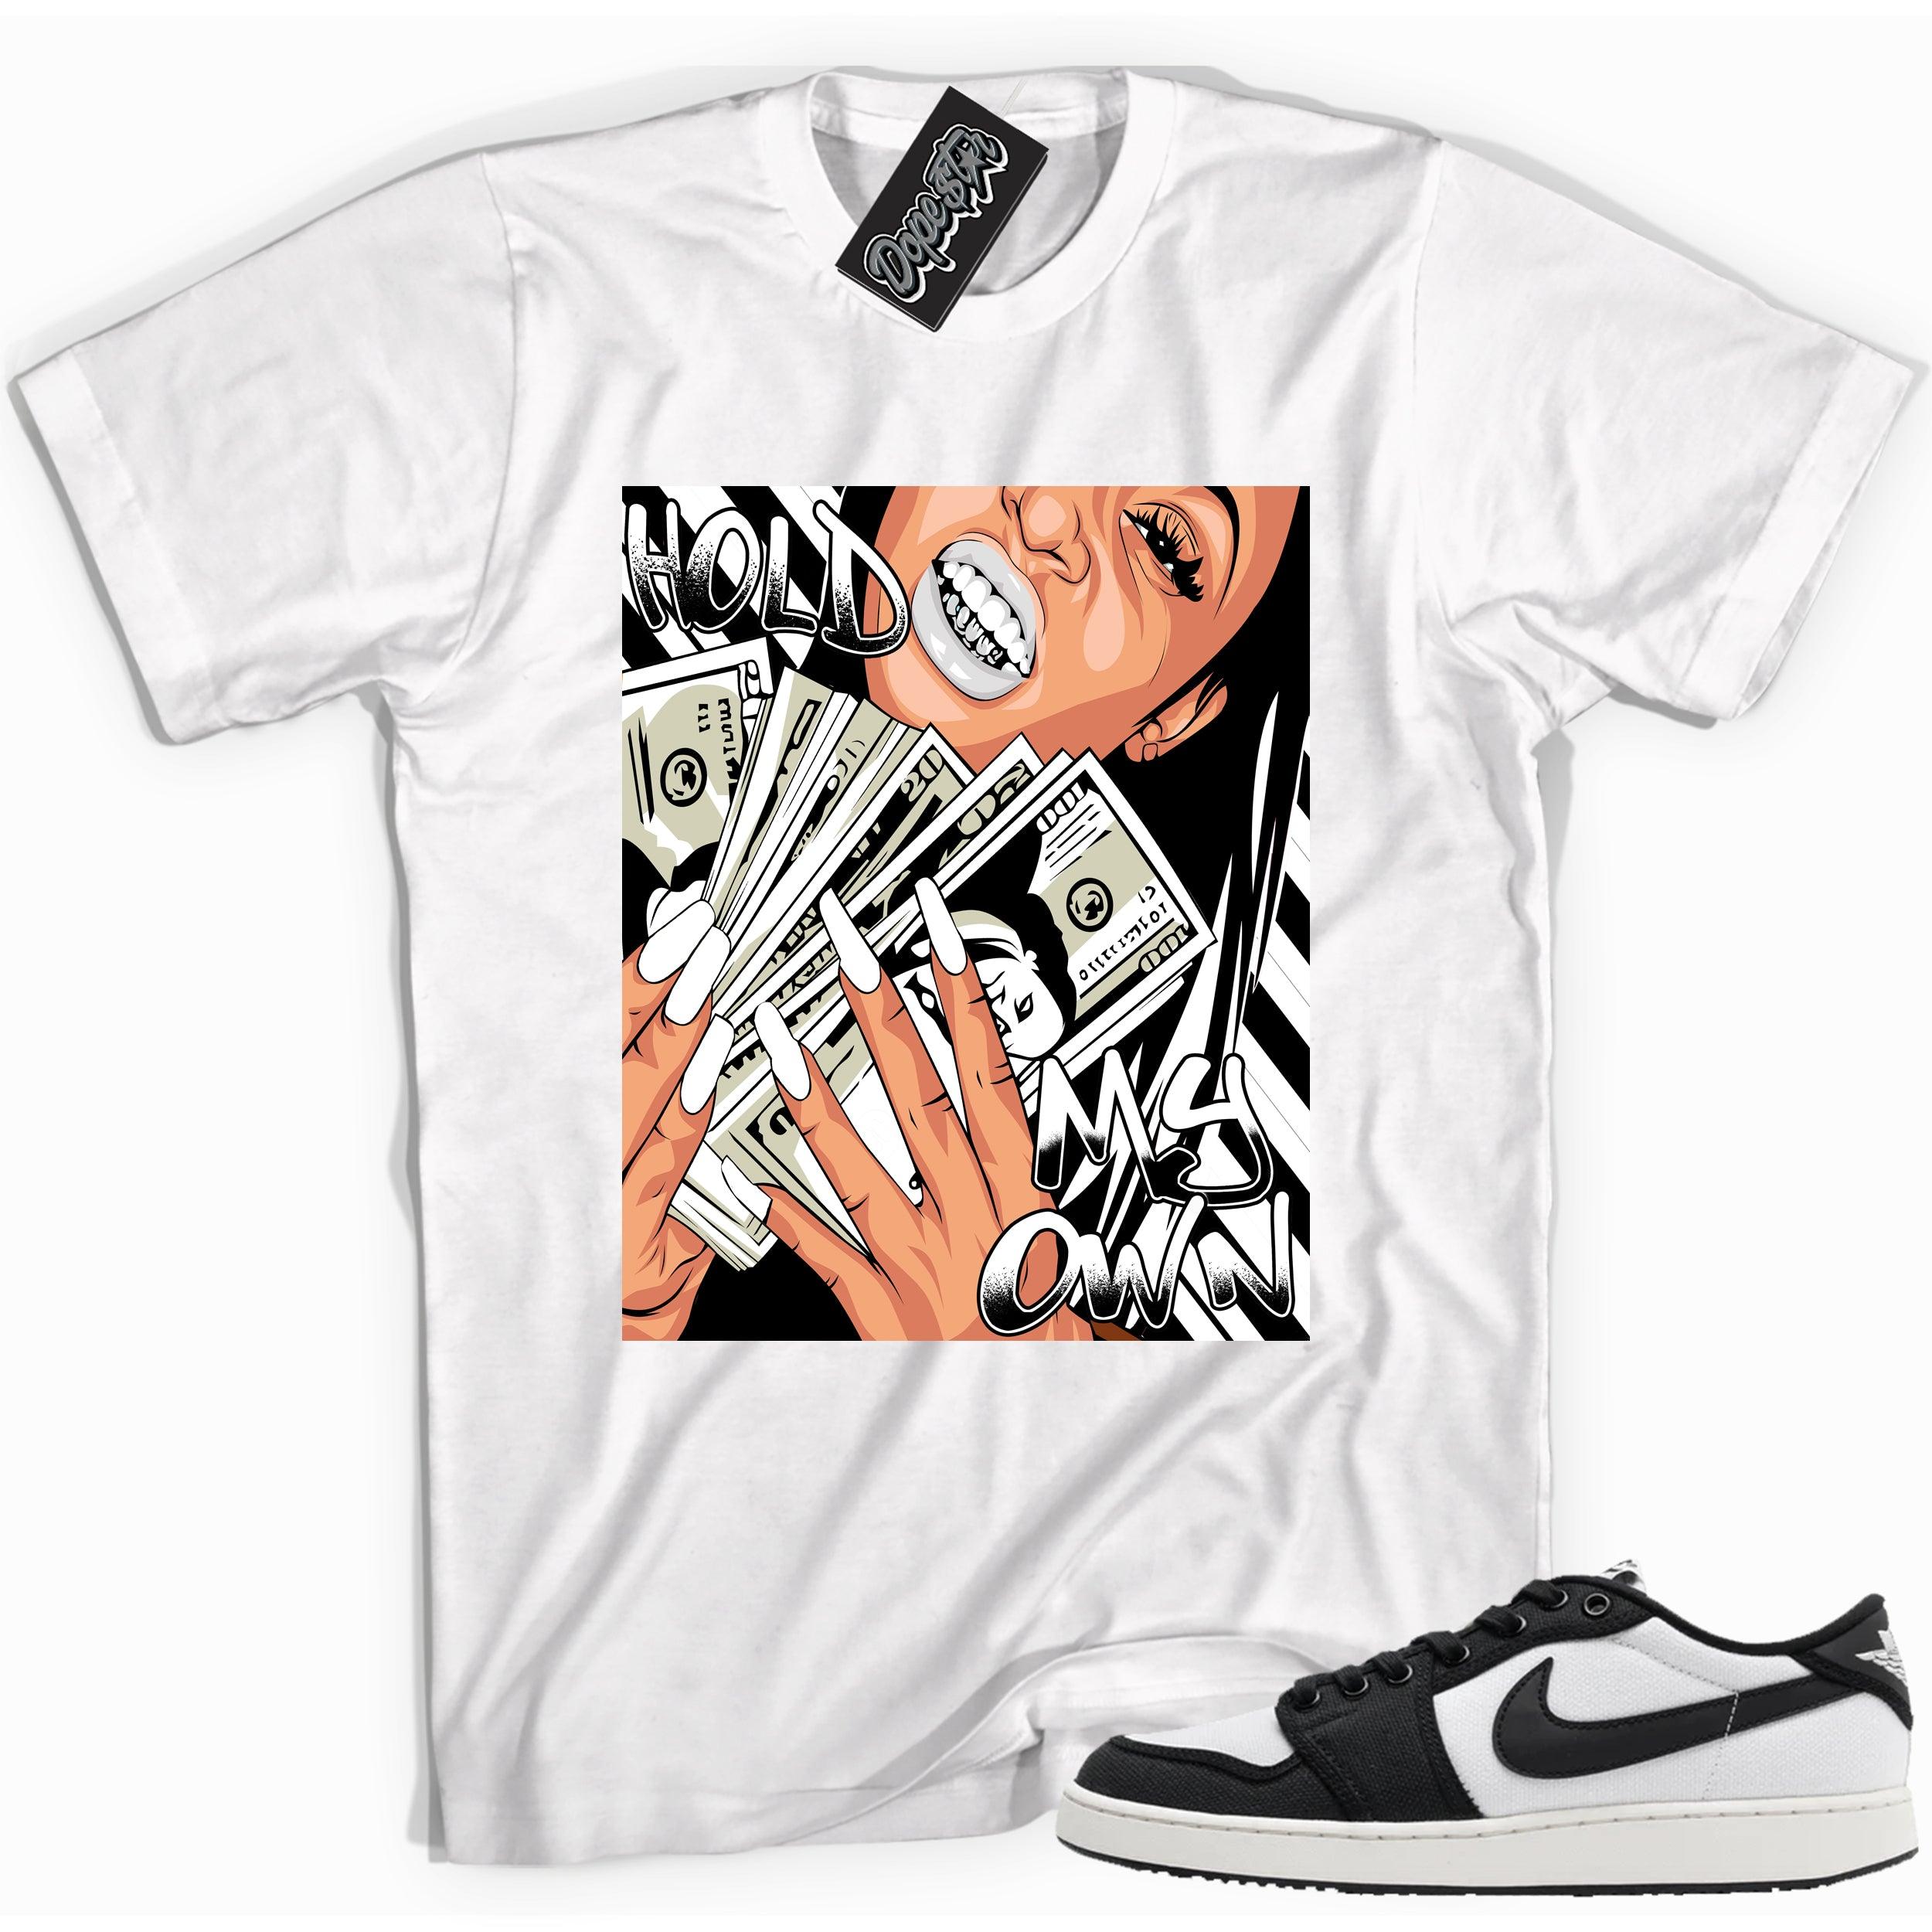 Cool white graphic tee with 'hold my own' print, that perfectly matches Air Jordan 1 Retro Ajko Low Black & White sneakers.